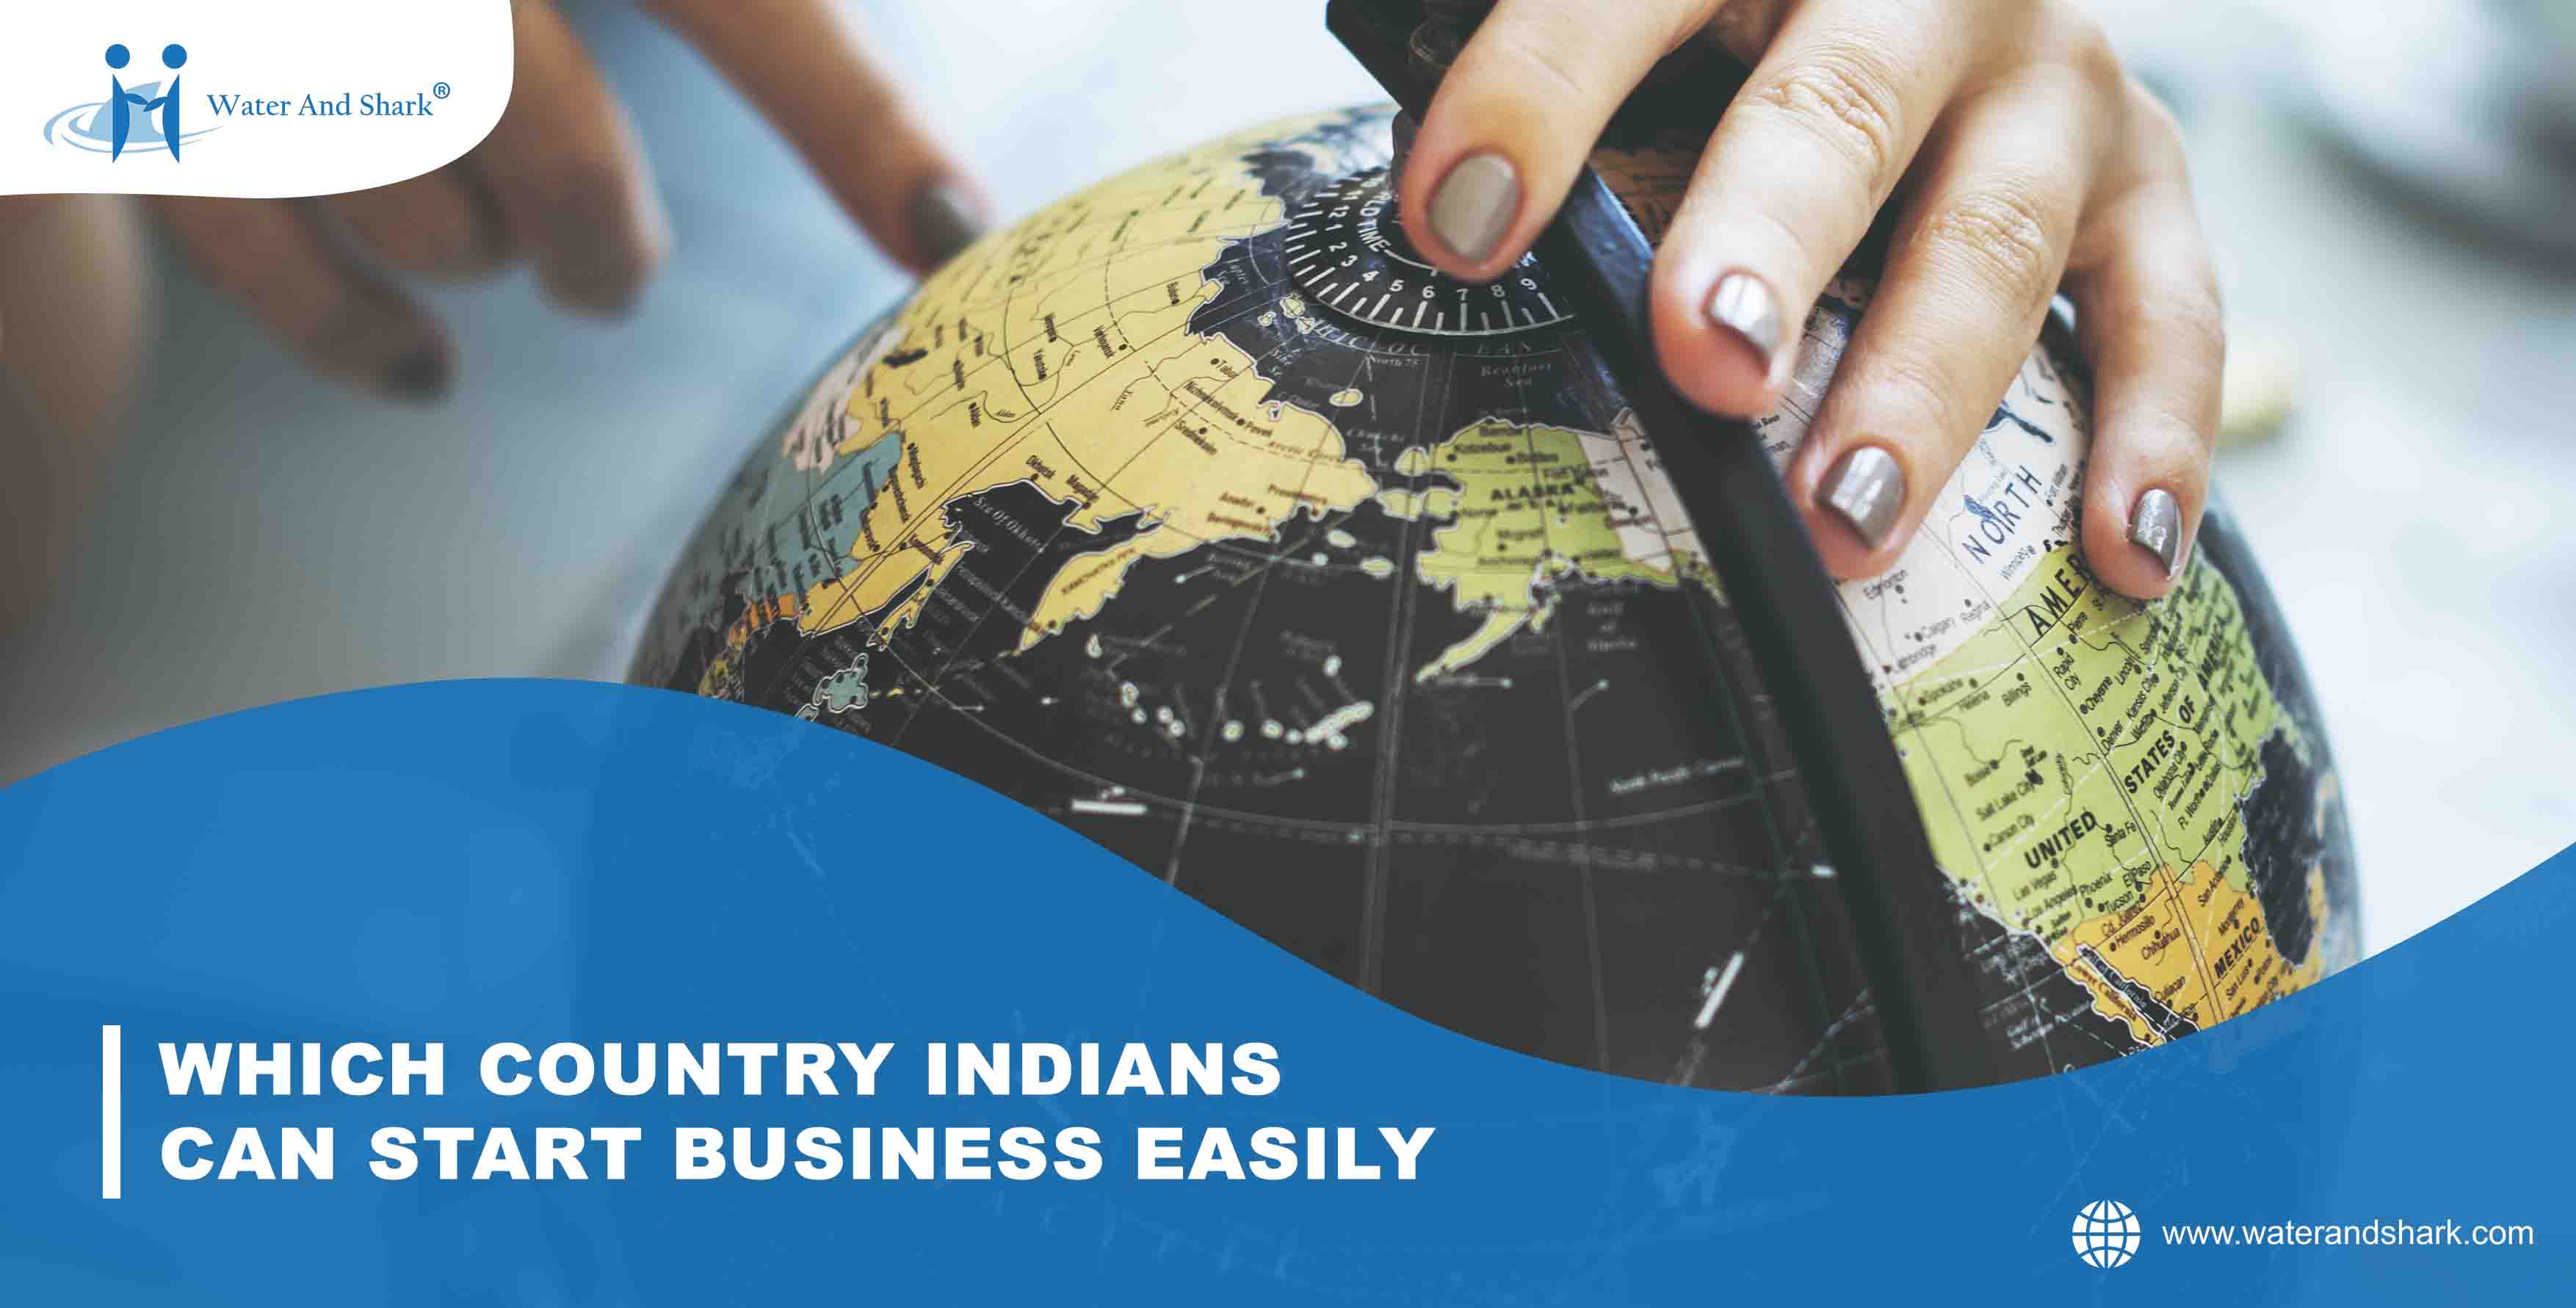 650x1280_WHICH_COUNTRY_INDIANS_CAN_START_BUSINESS_EASILY_low_size.jpg